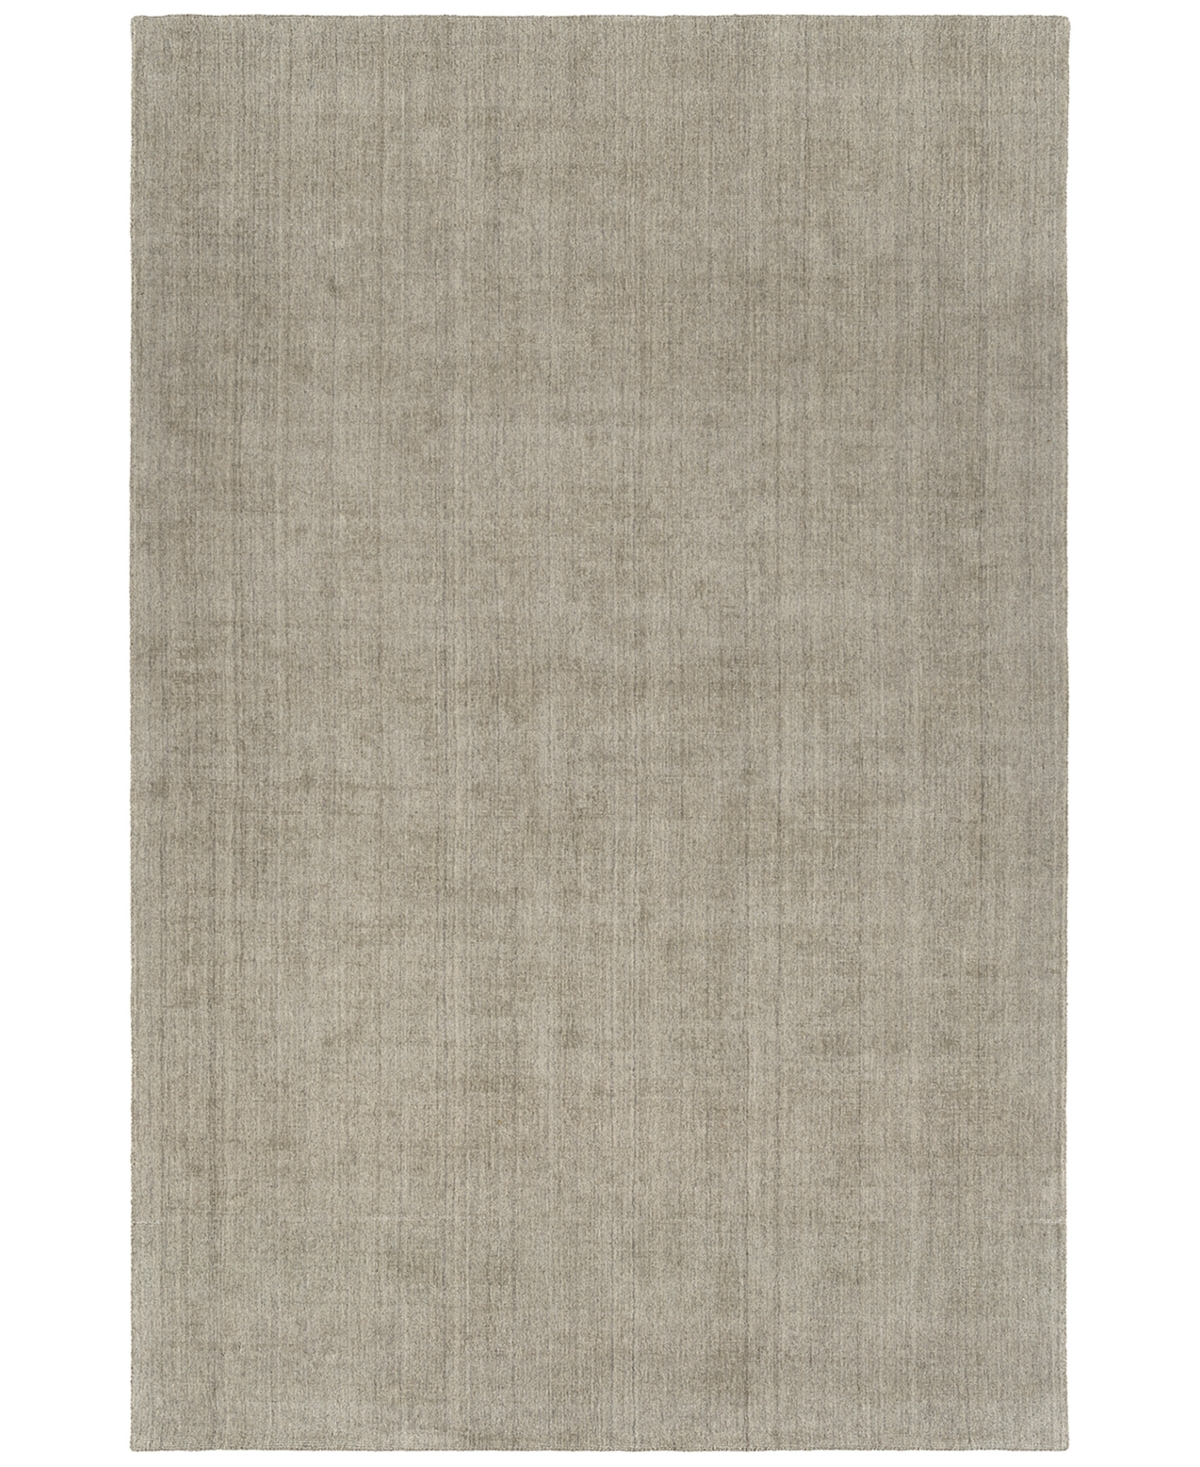 Stanton Rug Company Faye Fy100 Area Rug, 6' X 9' In Gray/ivory